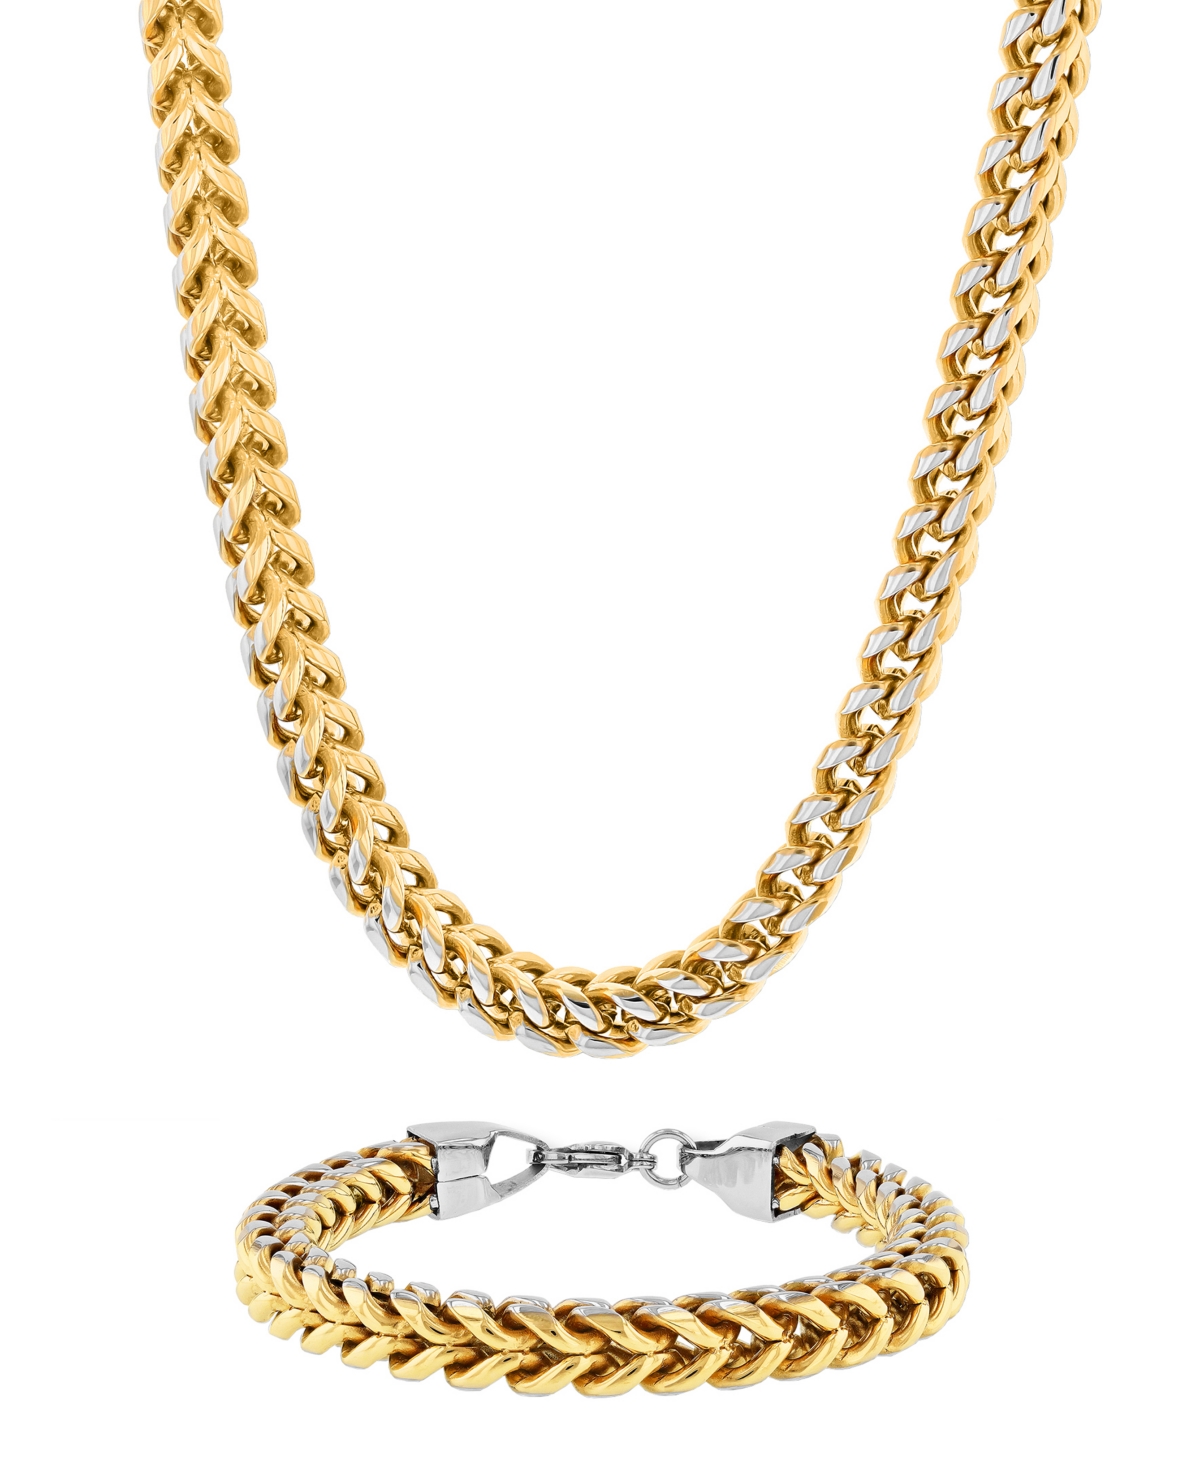 C & c Jewelry Macy's Men's Franco Link Chain Bracelet and Necklace Set in Two-Tone Stainless Steel